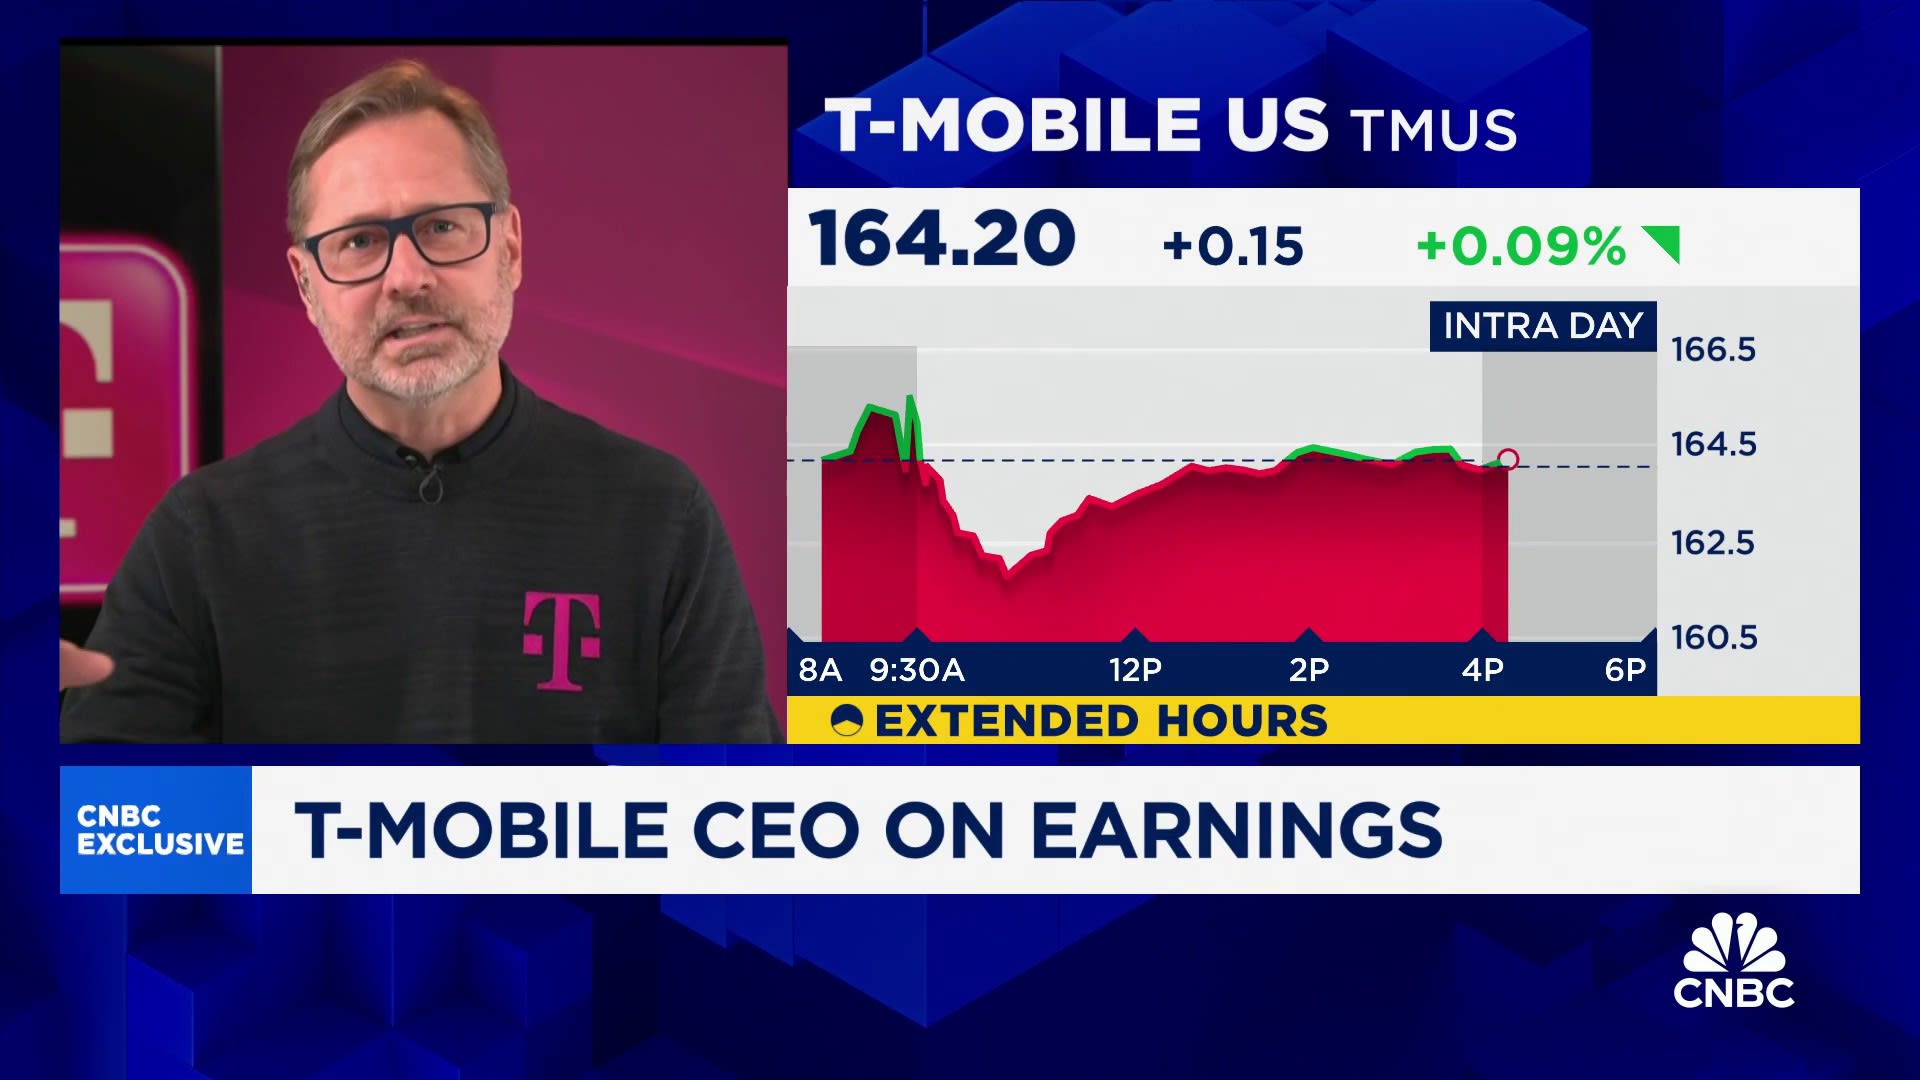 Getting into fiber is an opportunistic, financial, and customer experience play: T-Mobile CEO - CNBC